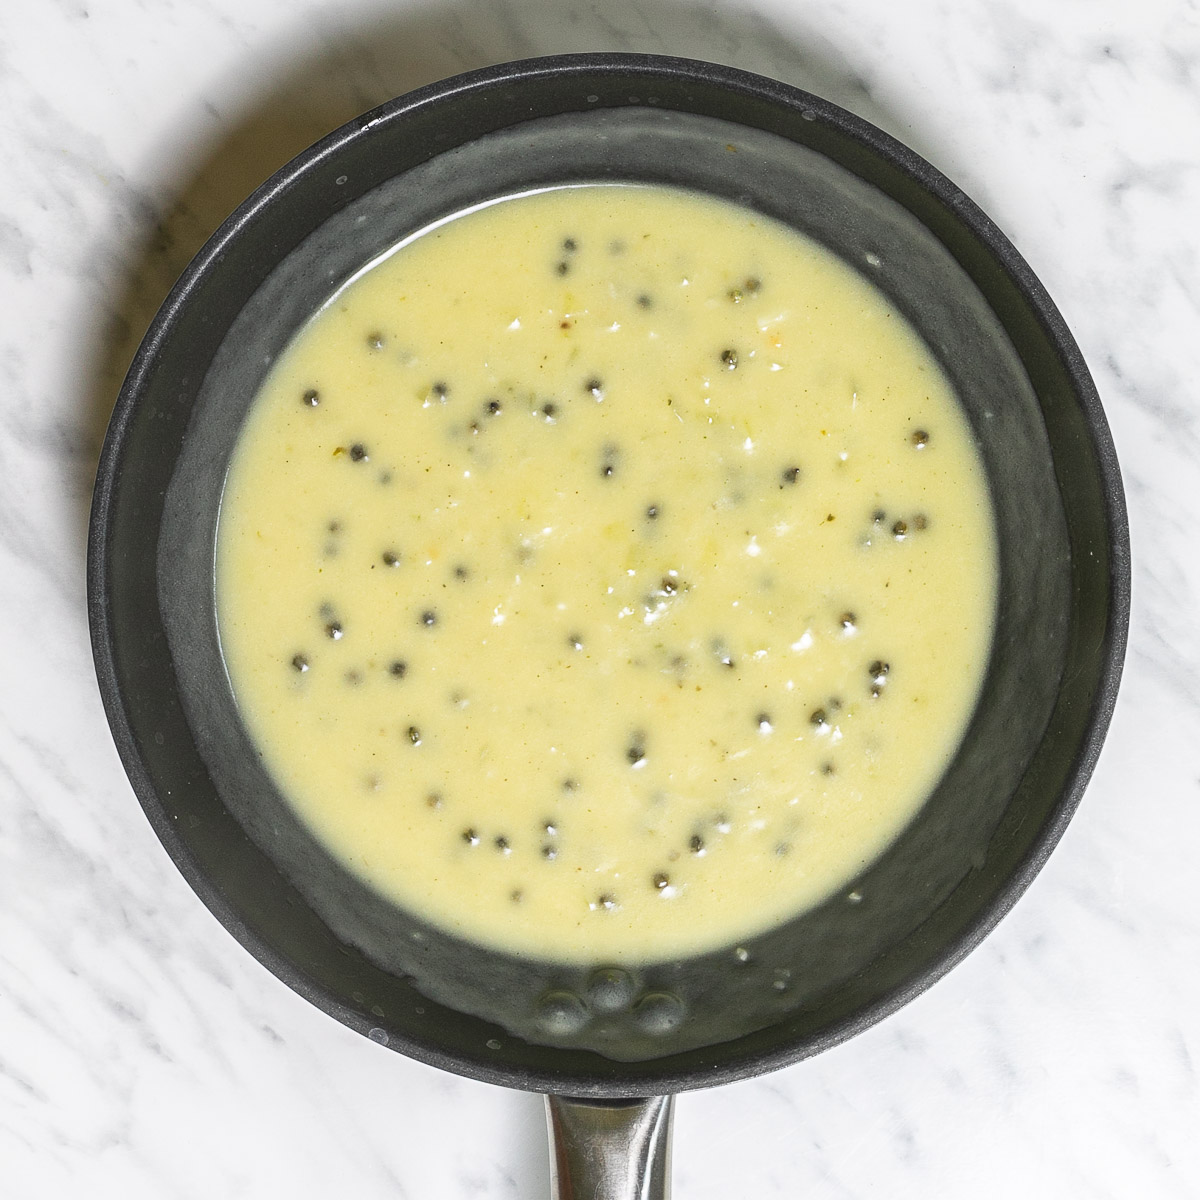 Black frying pan with a light green sauce with whole peppercorns.